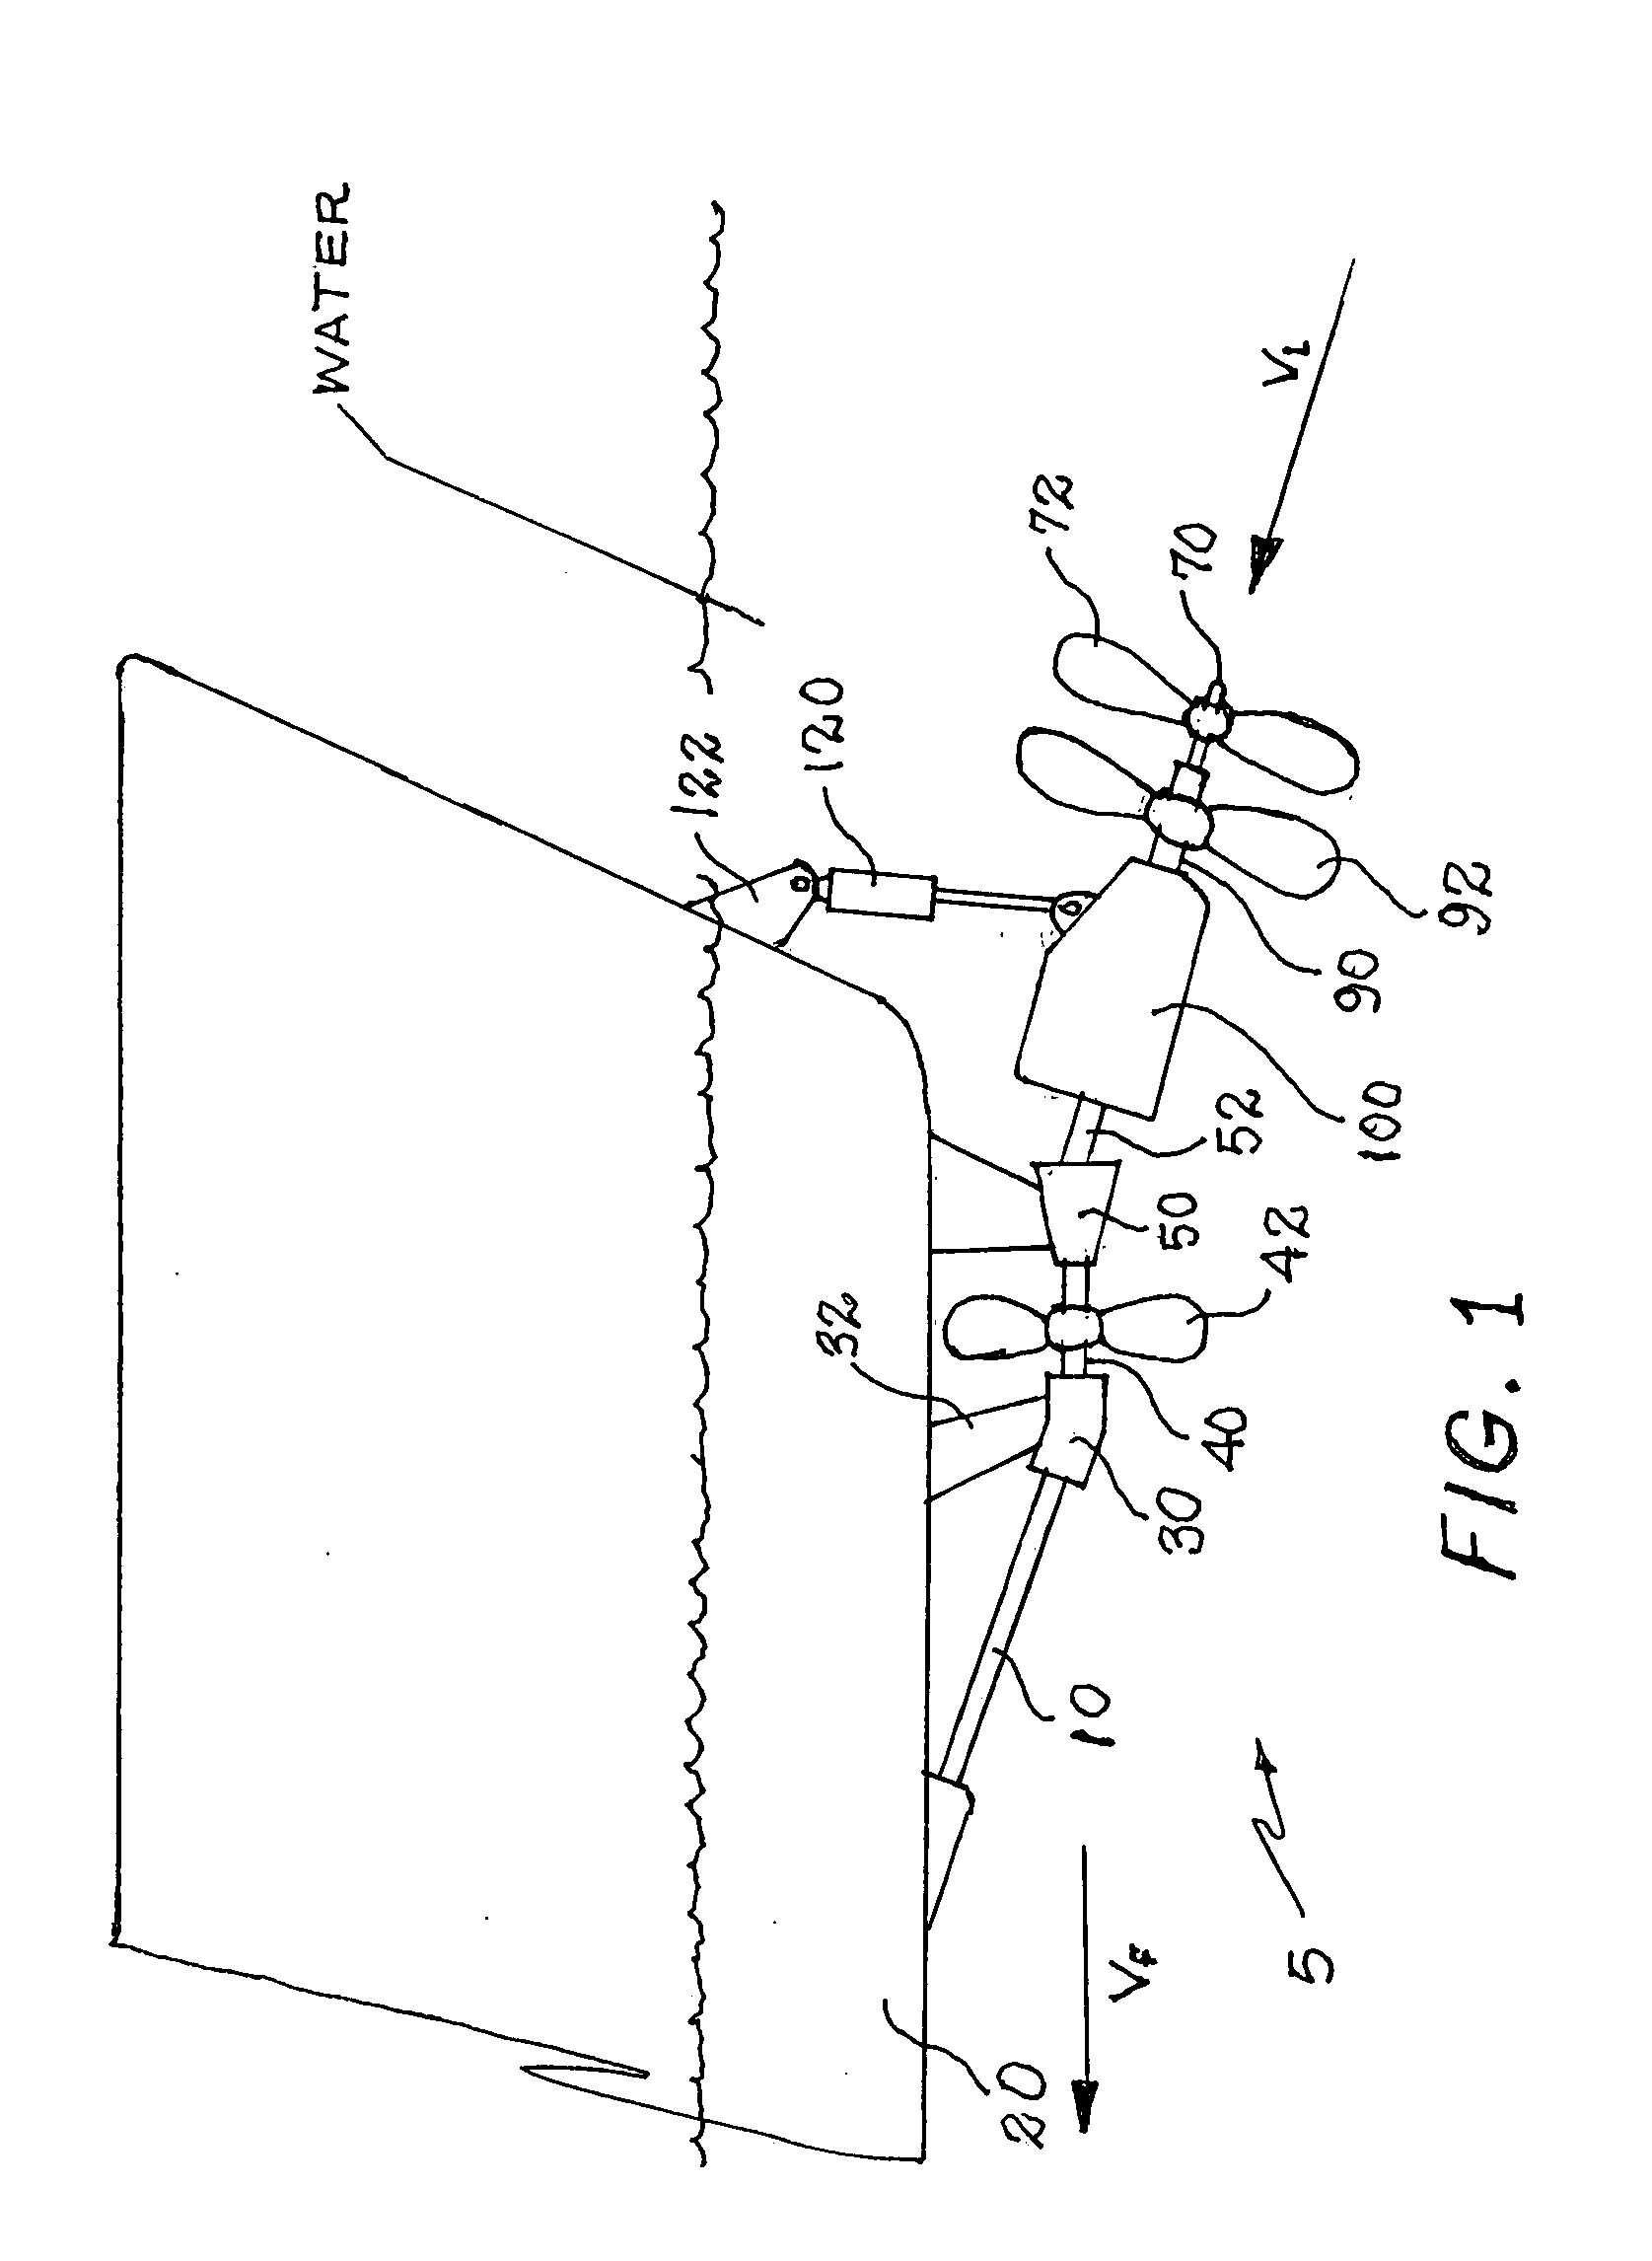 Propulsion system for a ship or seagoing vessel